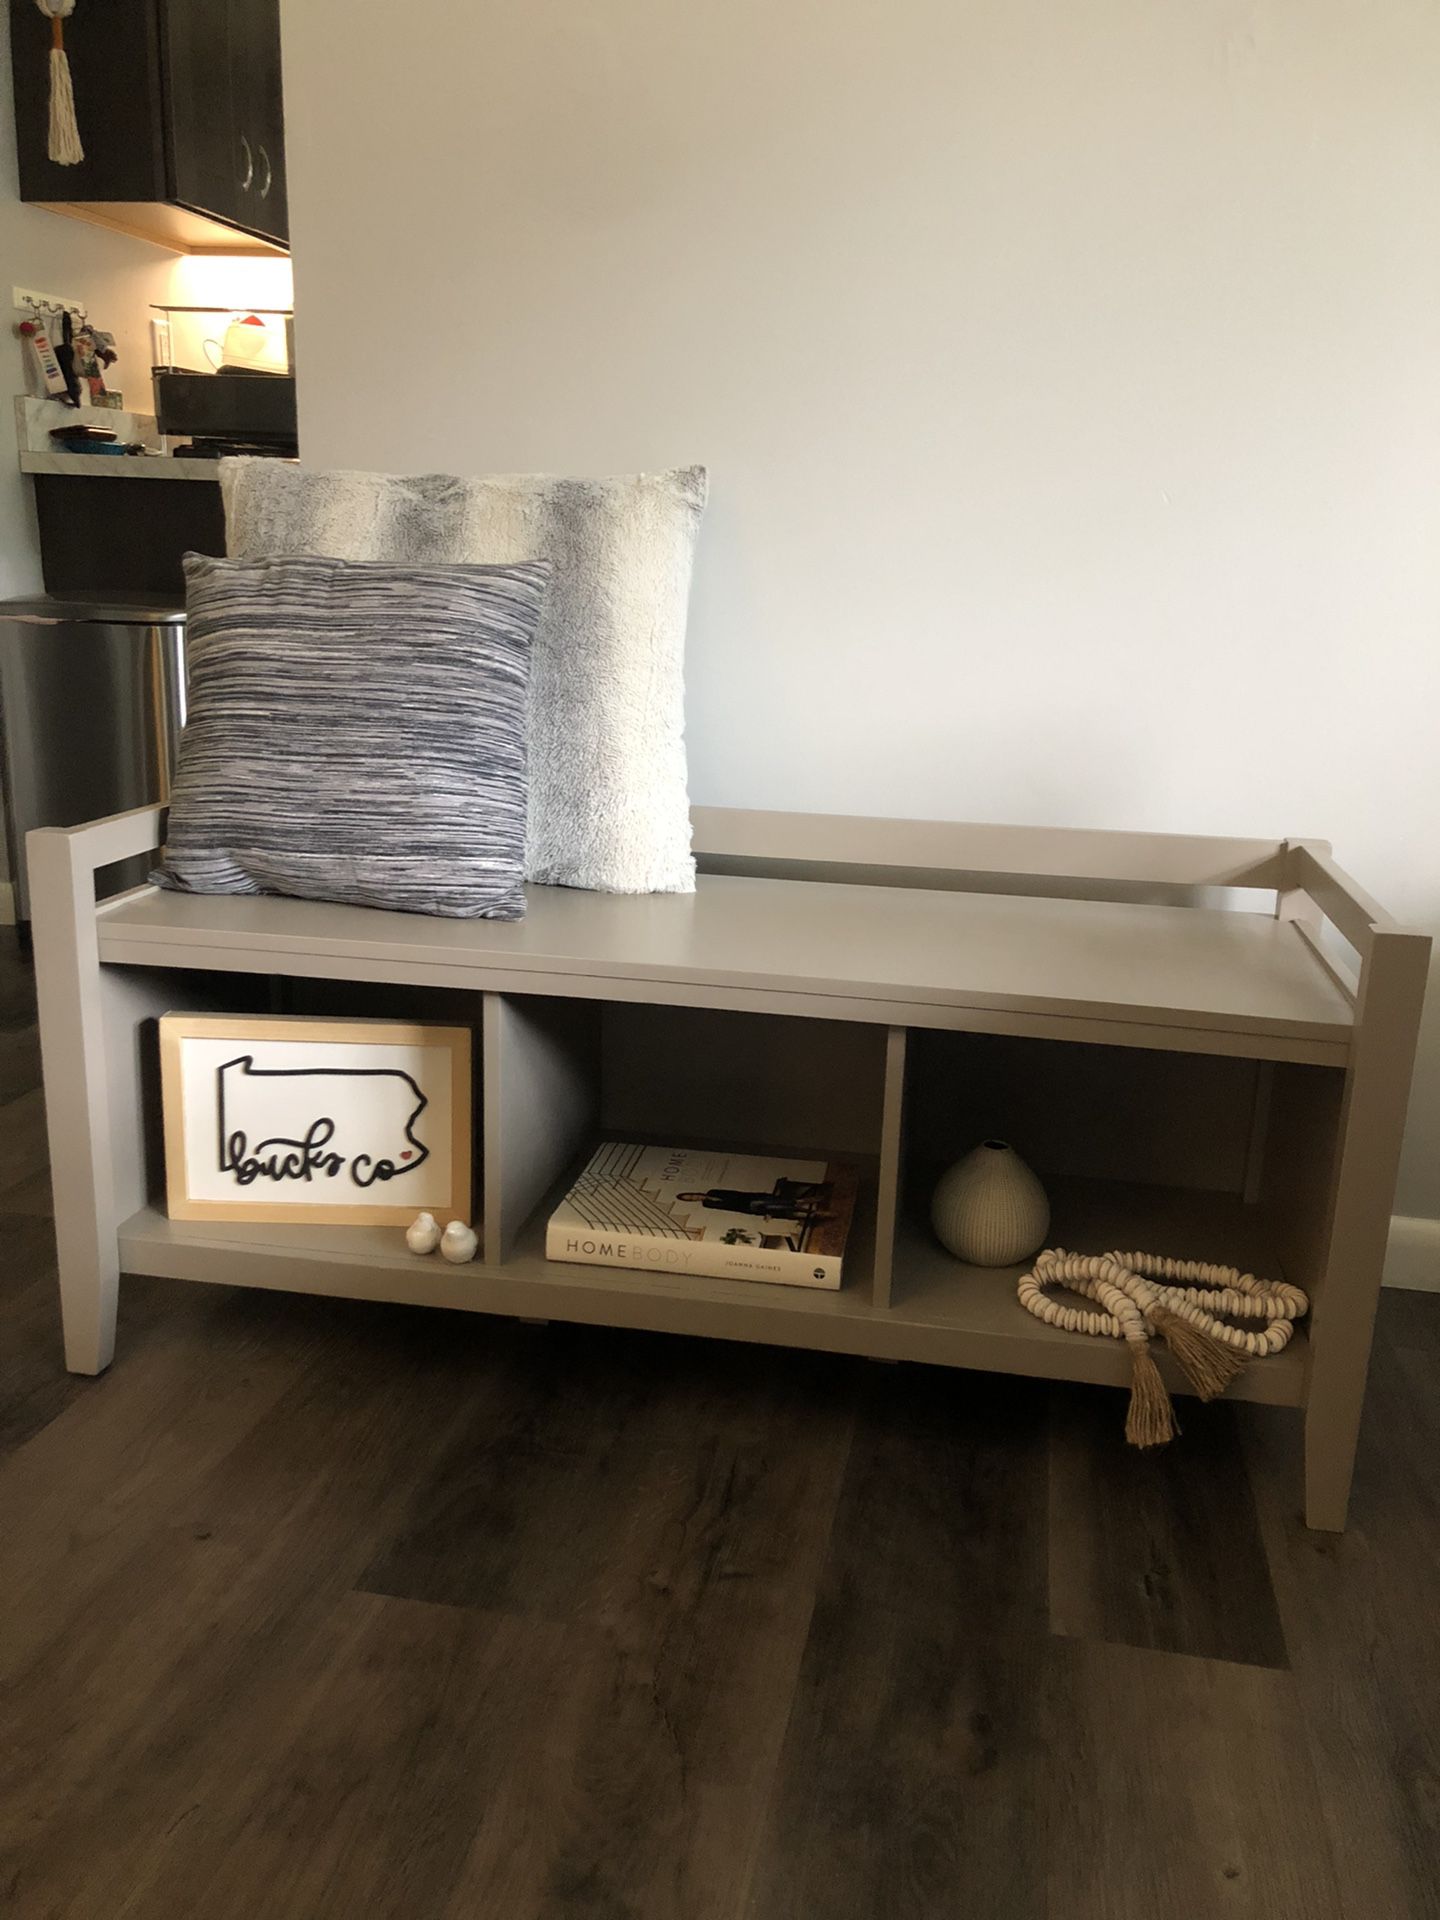 Modern wooden bench with cubbies